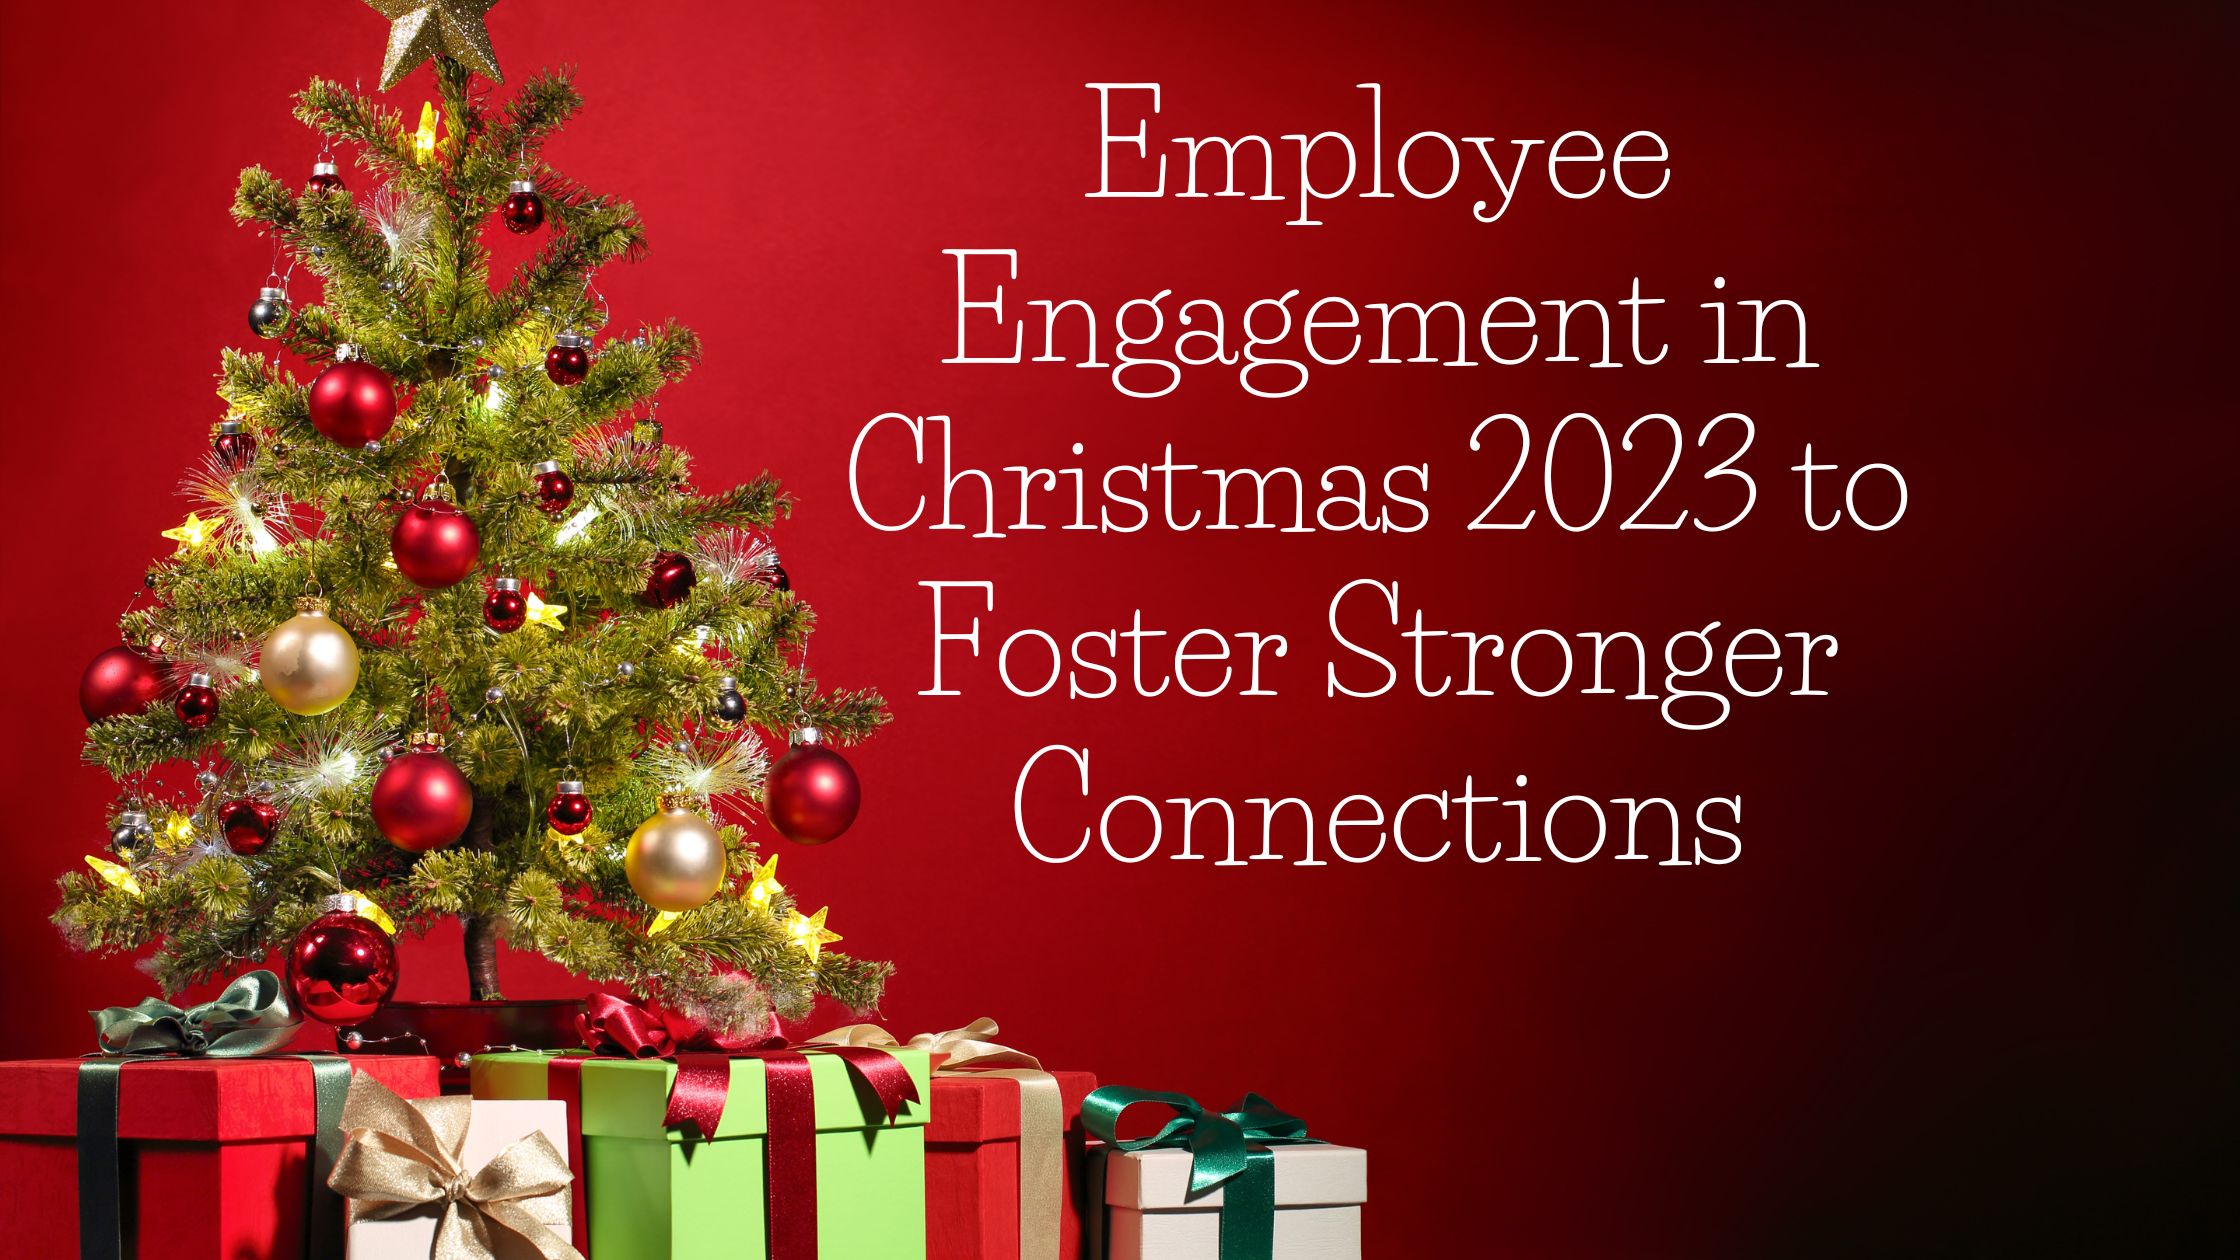 Employee Engagement in Christmas 2023 to Foster Stronger Connections